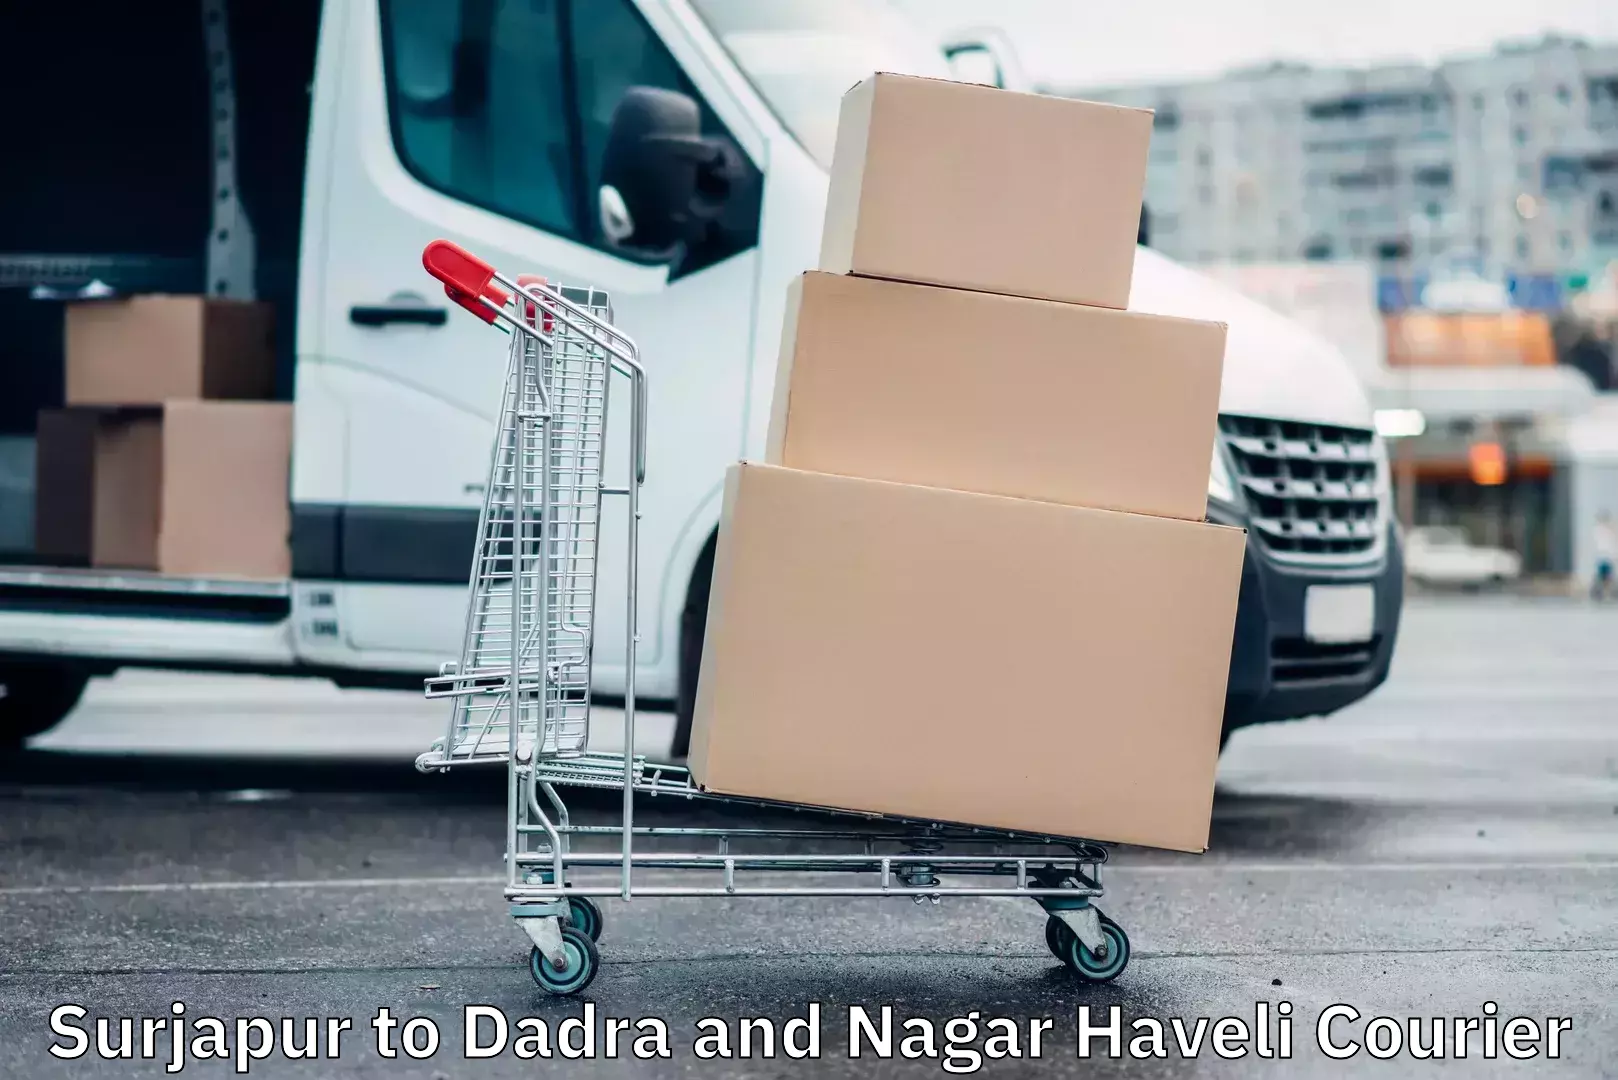 Competitive shipping rates Surjapur to Dadra and Nagar Haveli